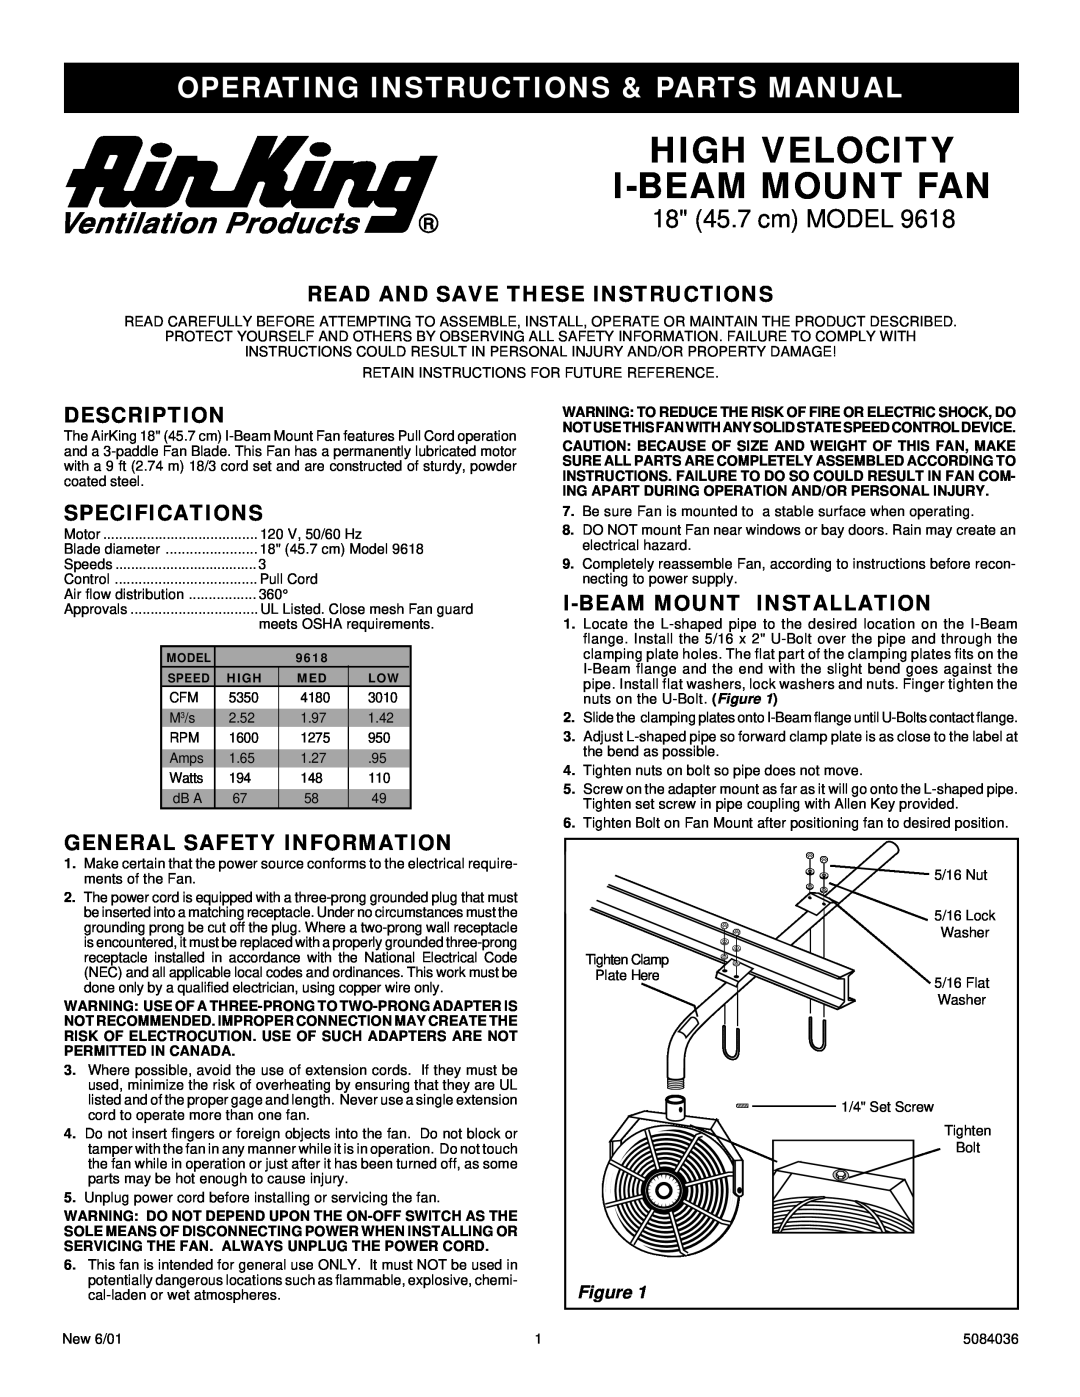 Air King Fan specifications Operating Instructions & Parts Manual, Read And Save These Instructions, Description 